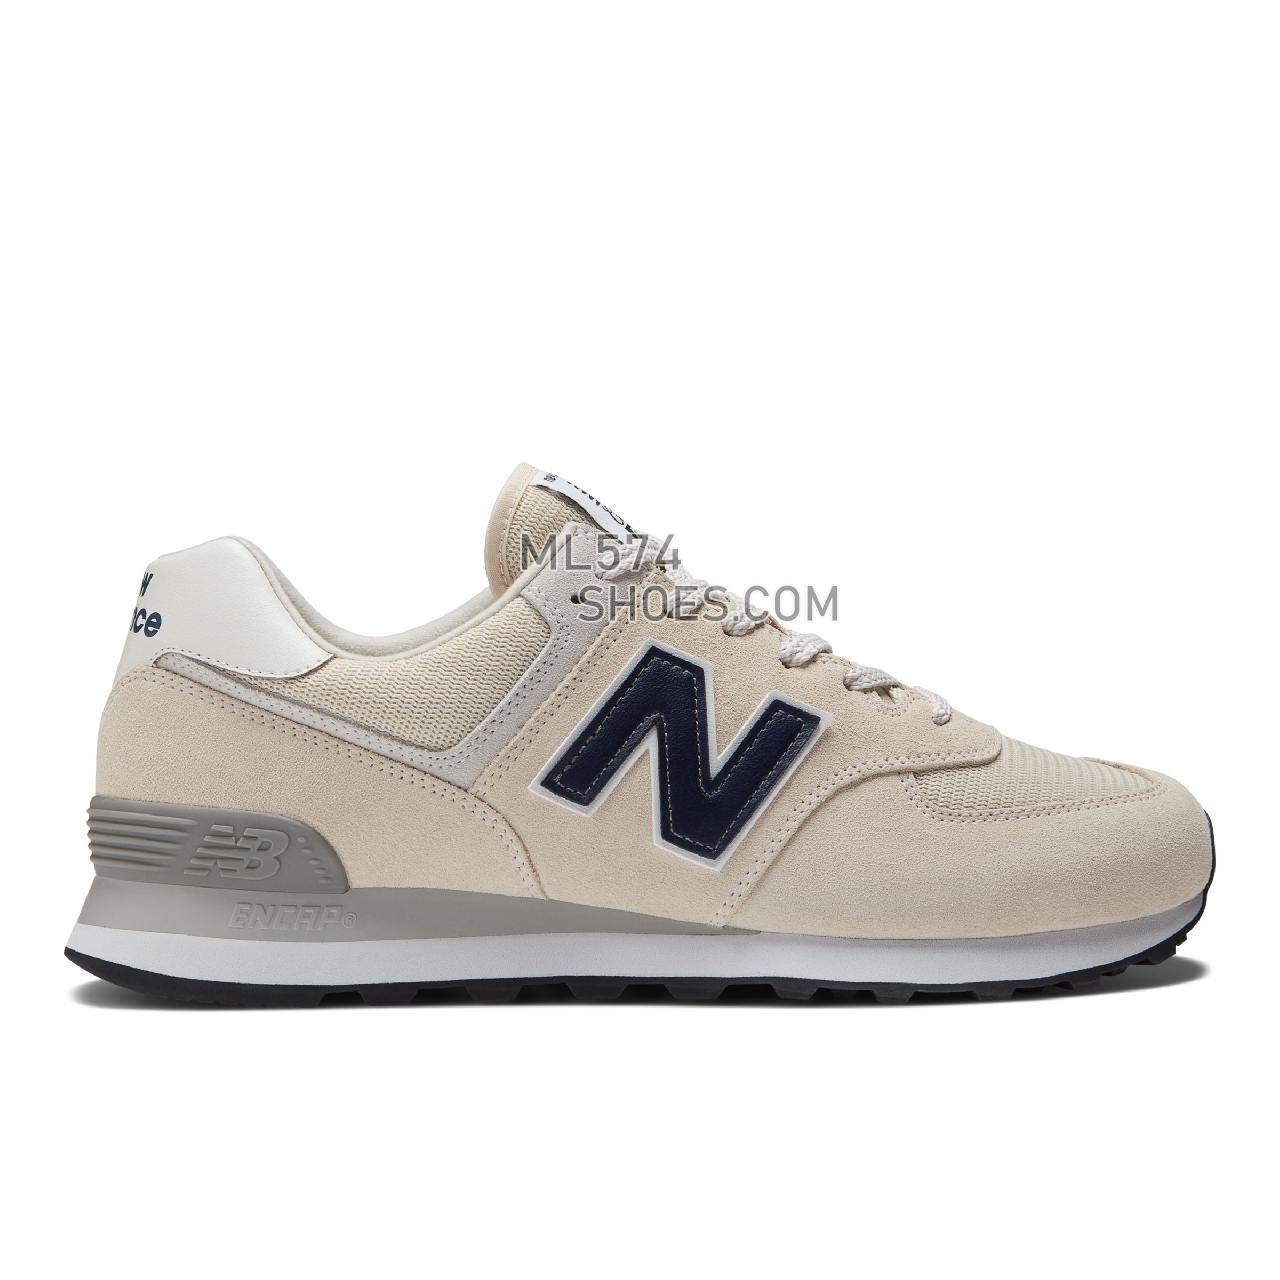 New Balance 574v2 - Men's Classic Sneakers - Tan with Navy - ML574EQ2